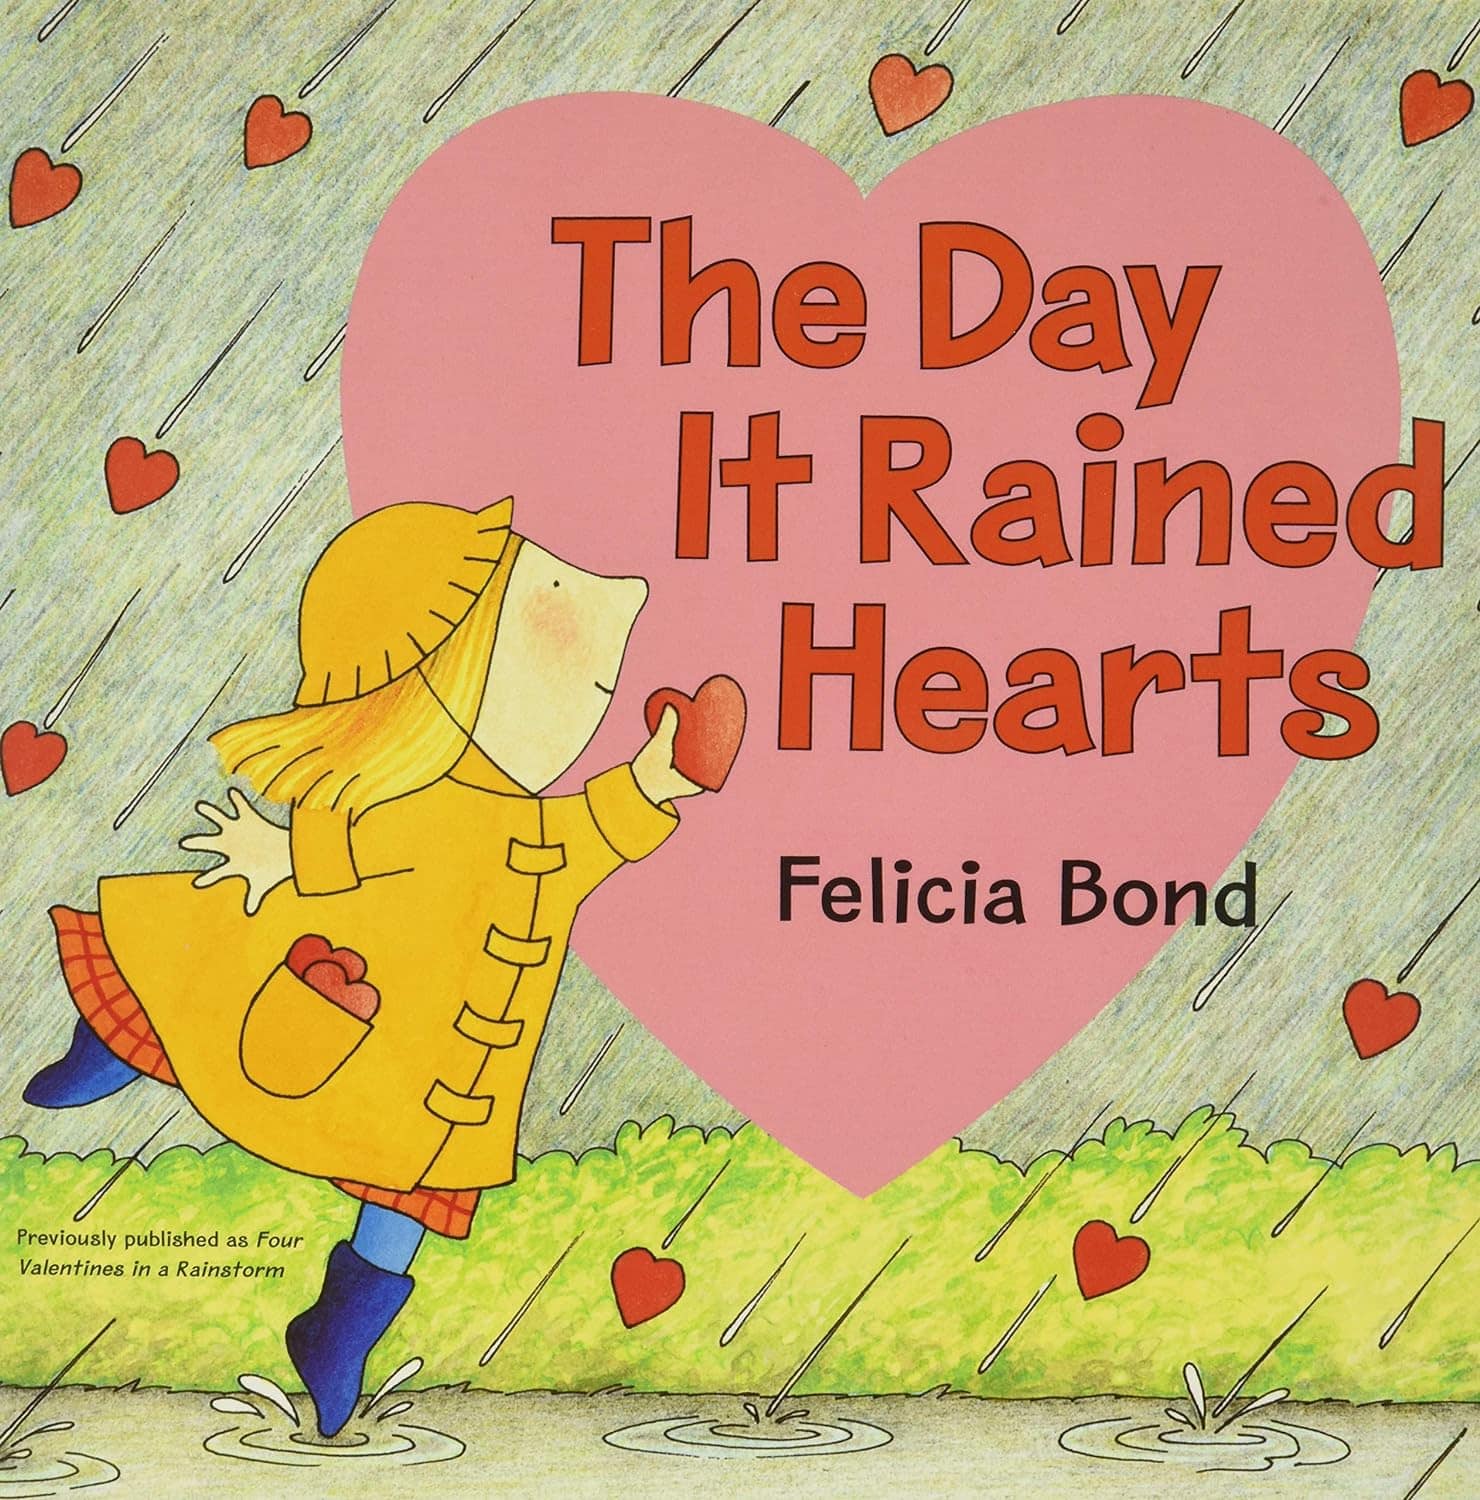 “The Day It Rained Hearts” by Felicia Bond